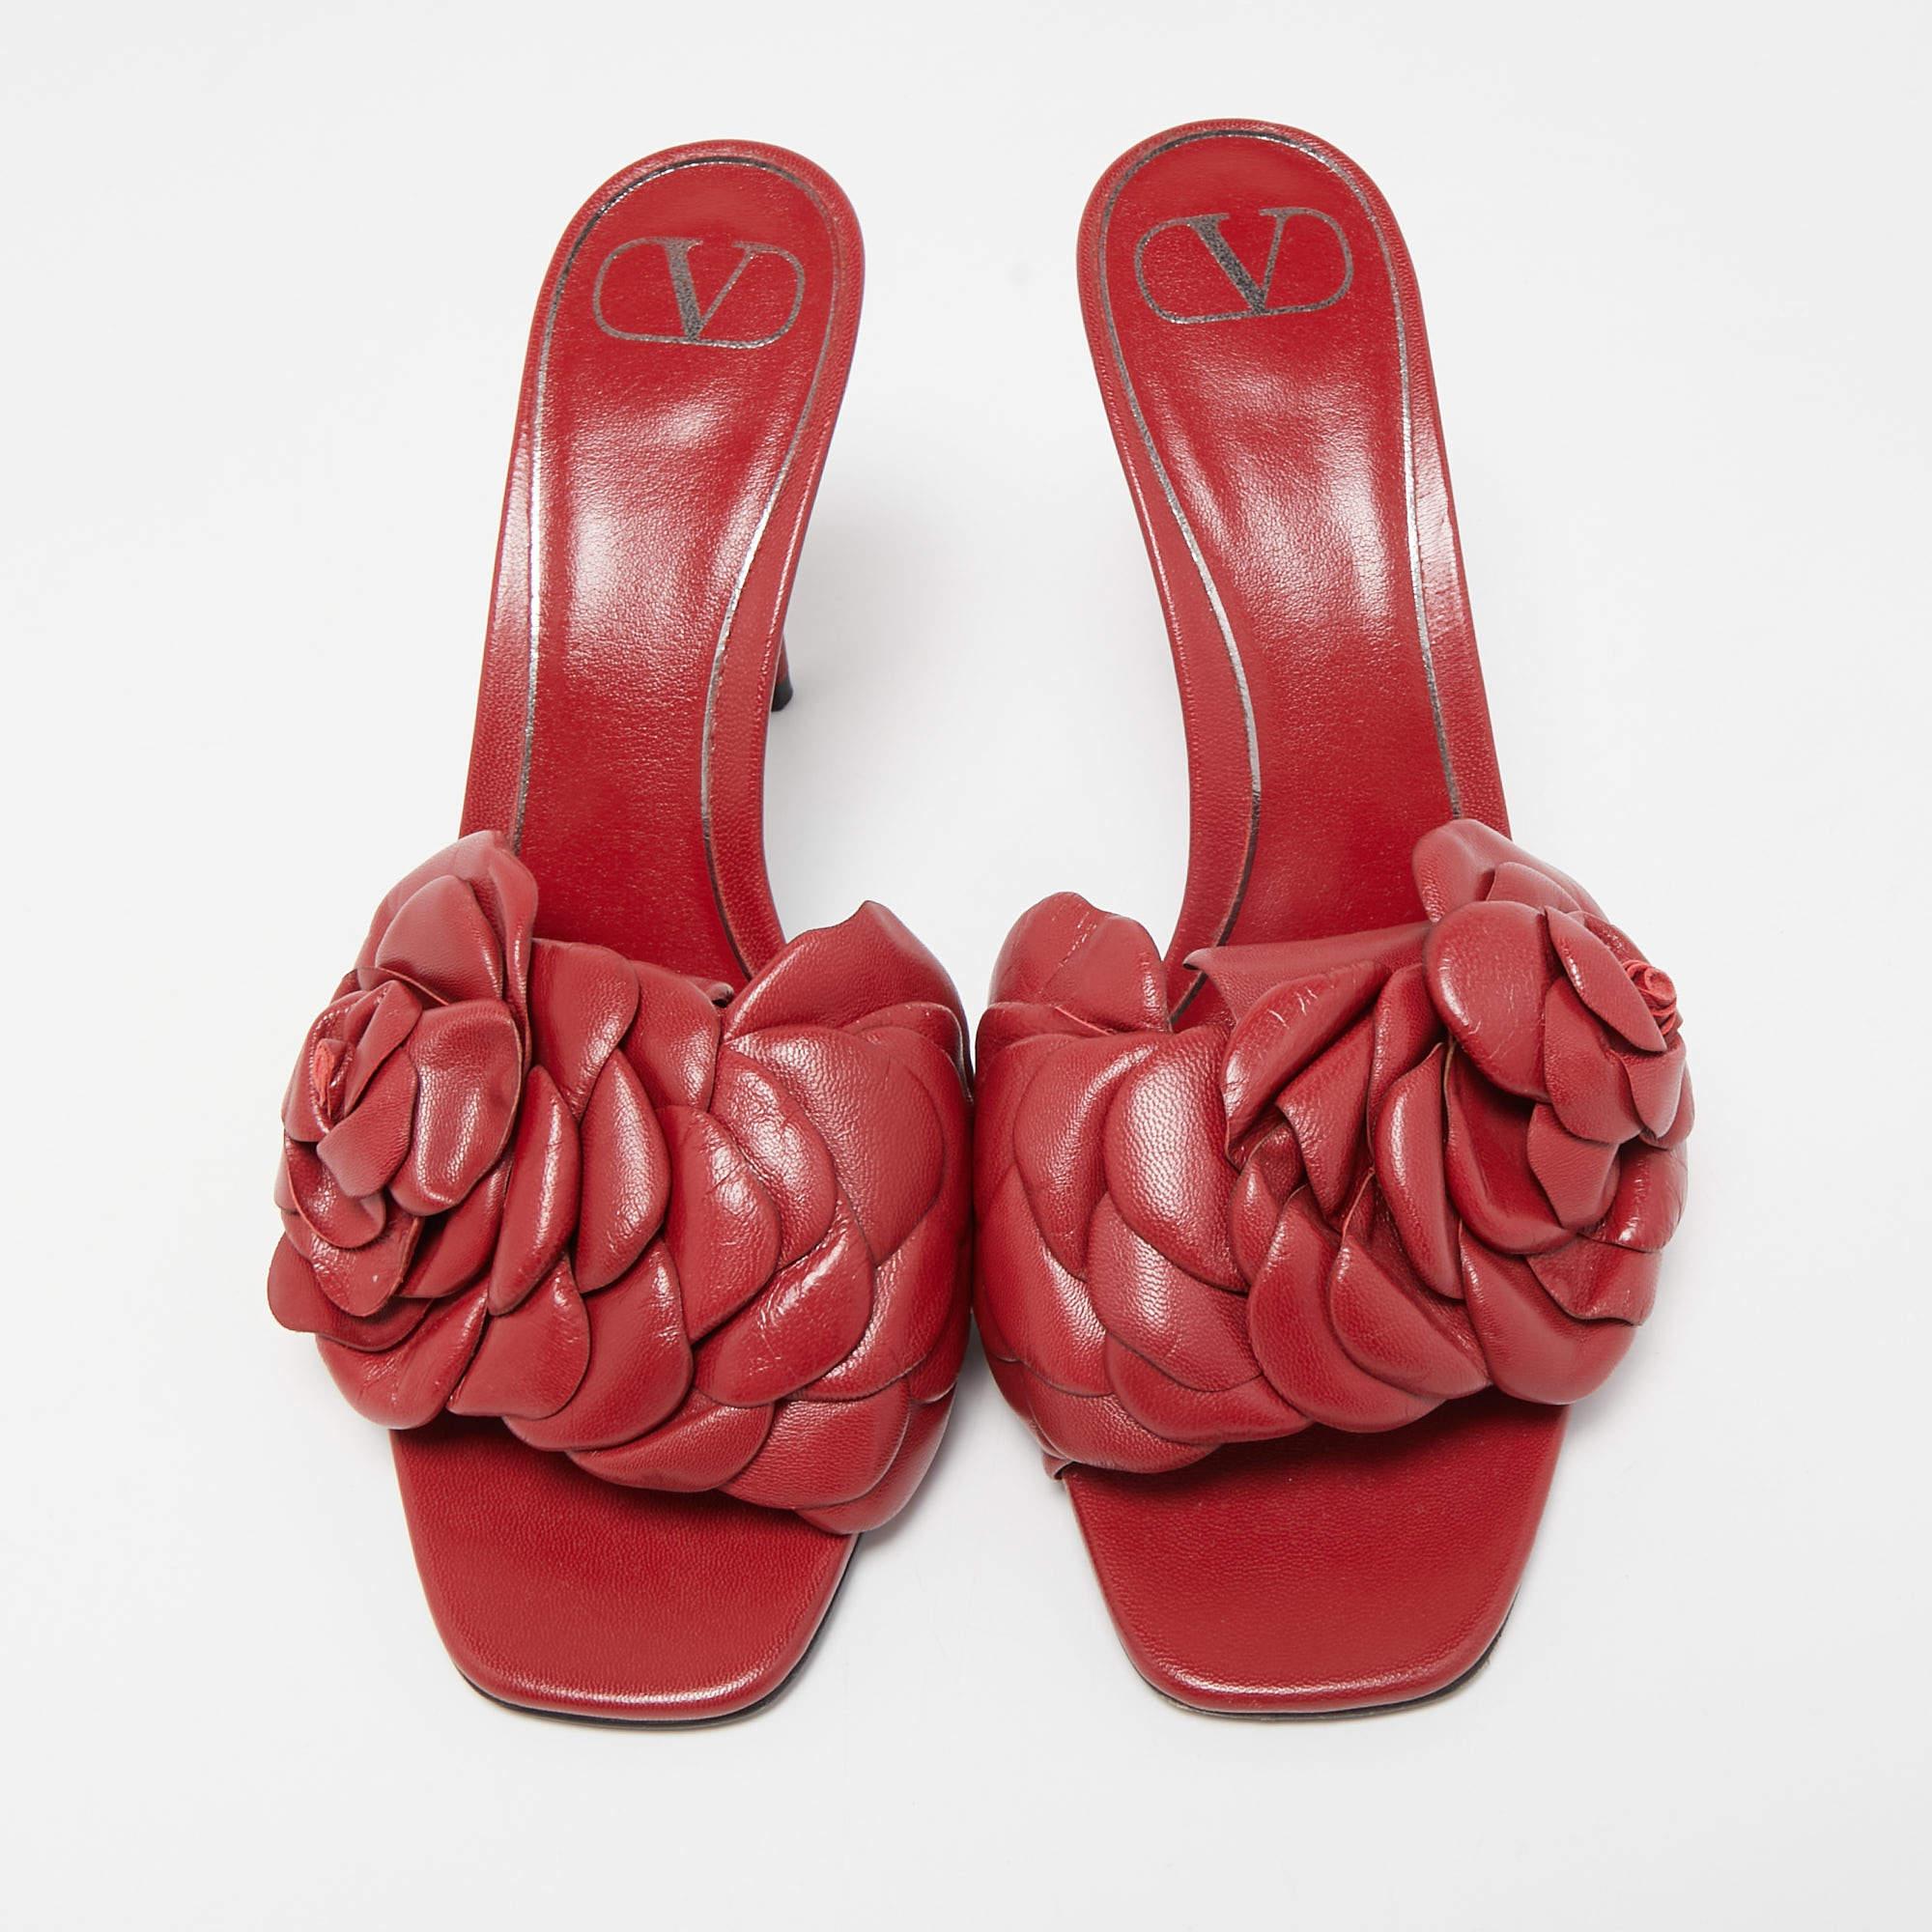 Infused with romantic aesthetics, these Valentino sandals are captivating in a red shade. They are made from leather and are appealing with a rose motif on the upper and are balanced upon 9.5 cm heels.

Includes
Original Dustbag